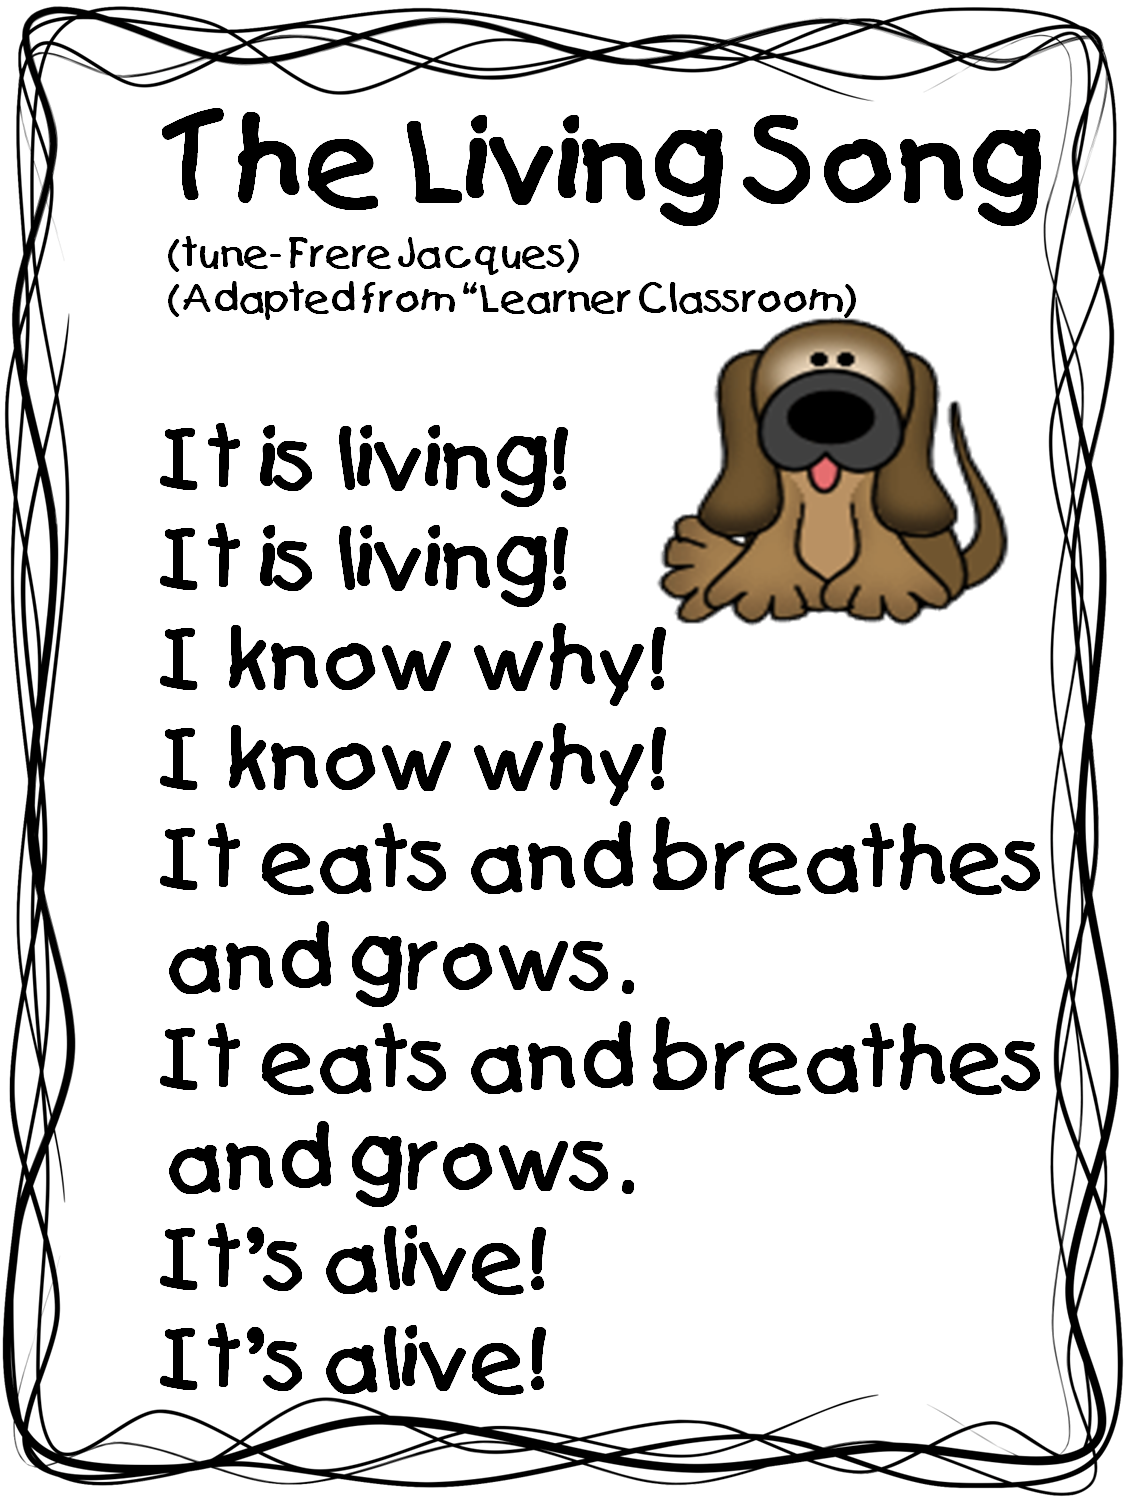 Non Living Things Pictures For Kids PNG - Living Songu0026 (Tune